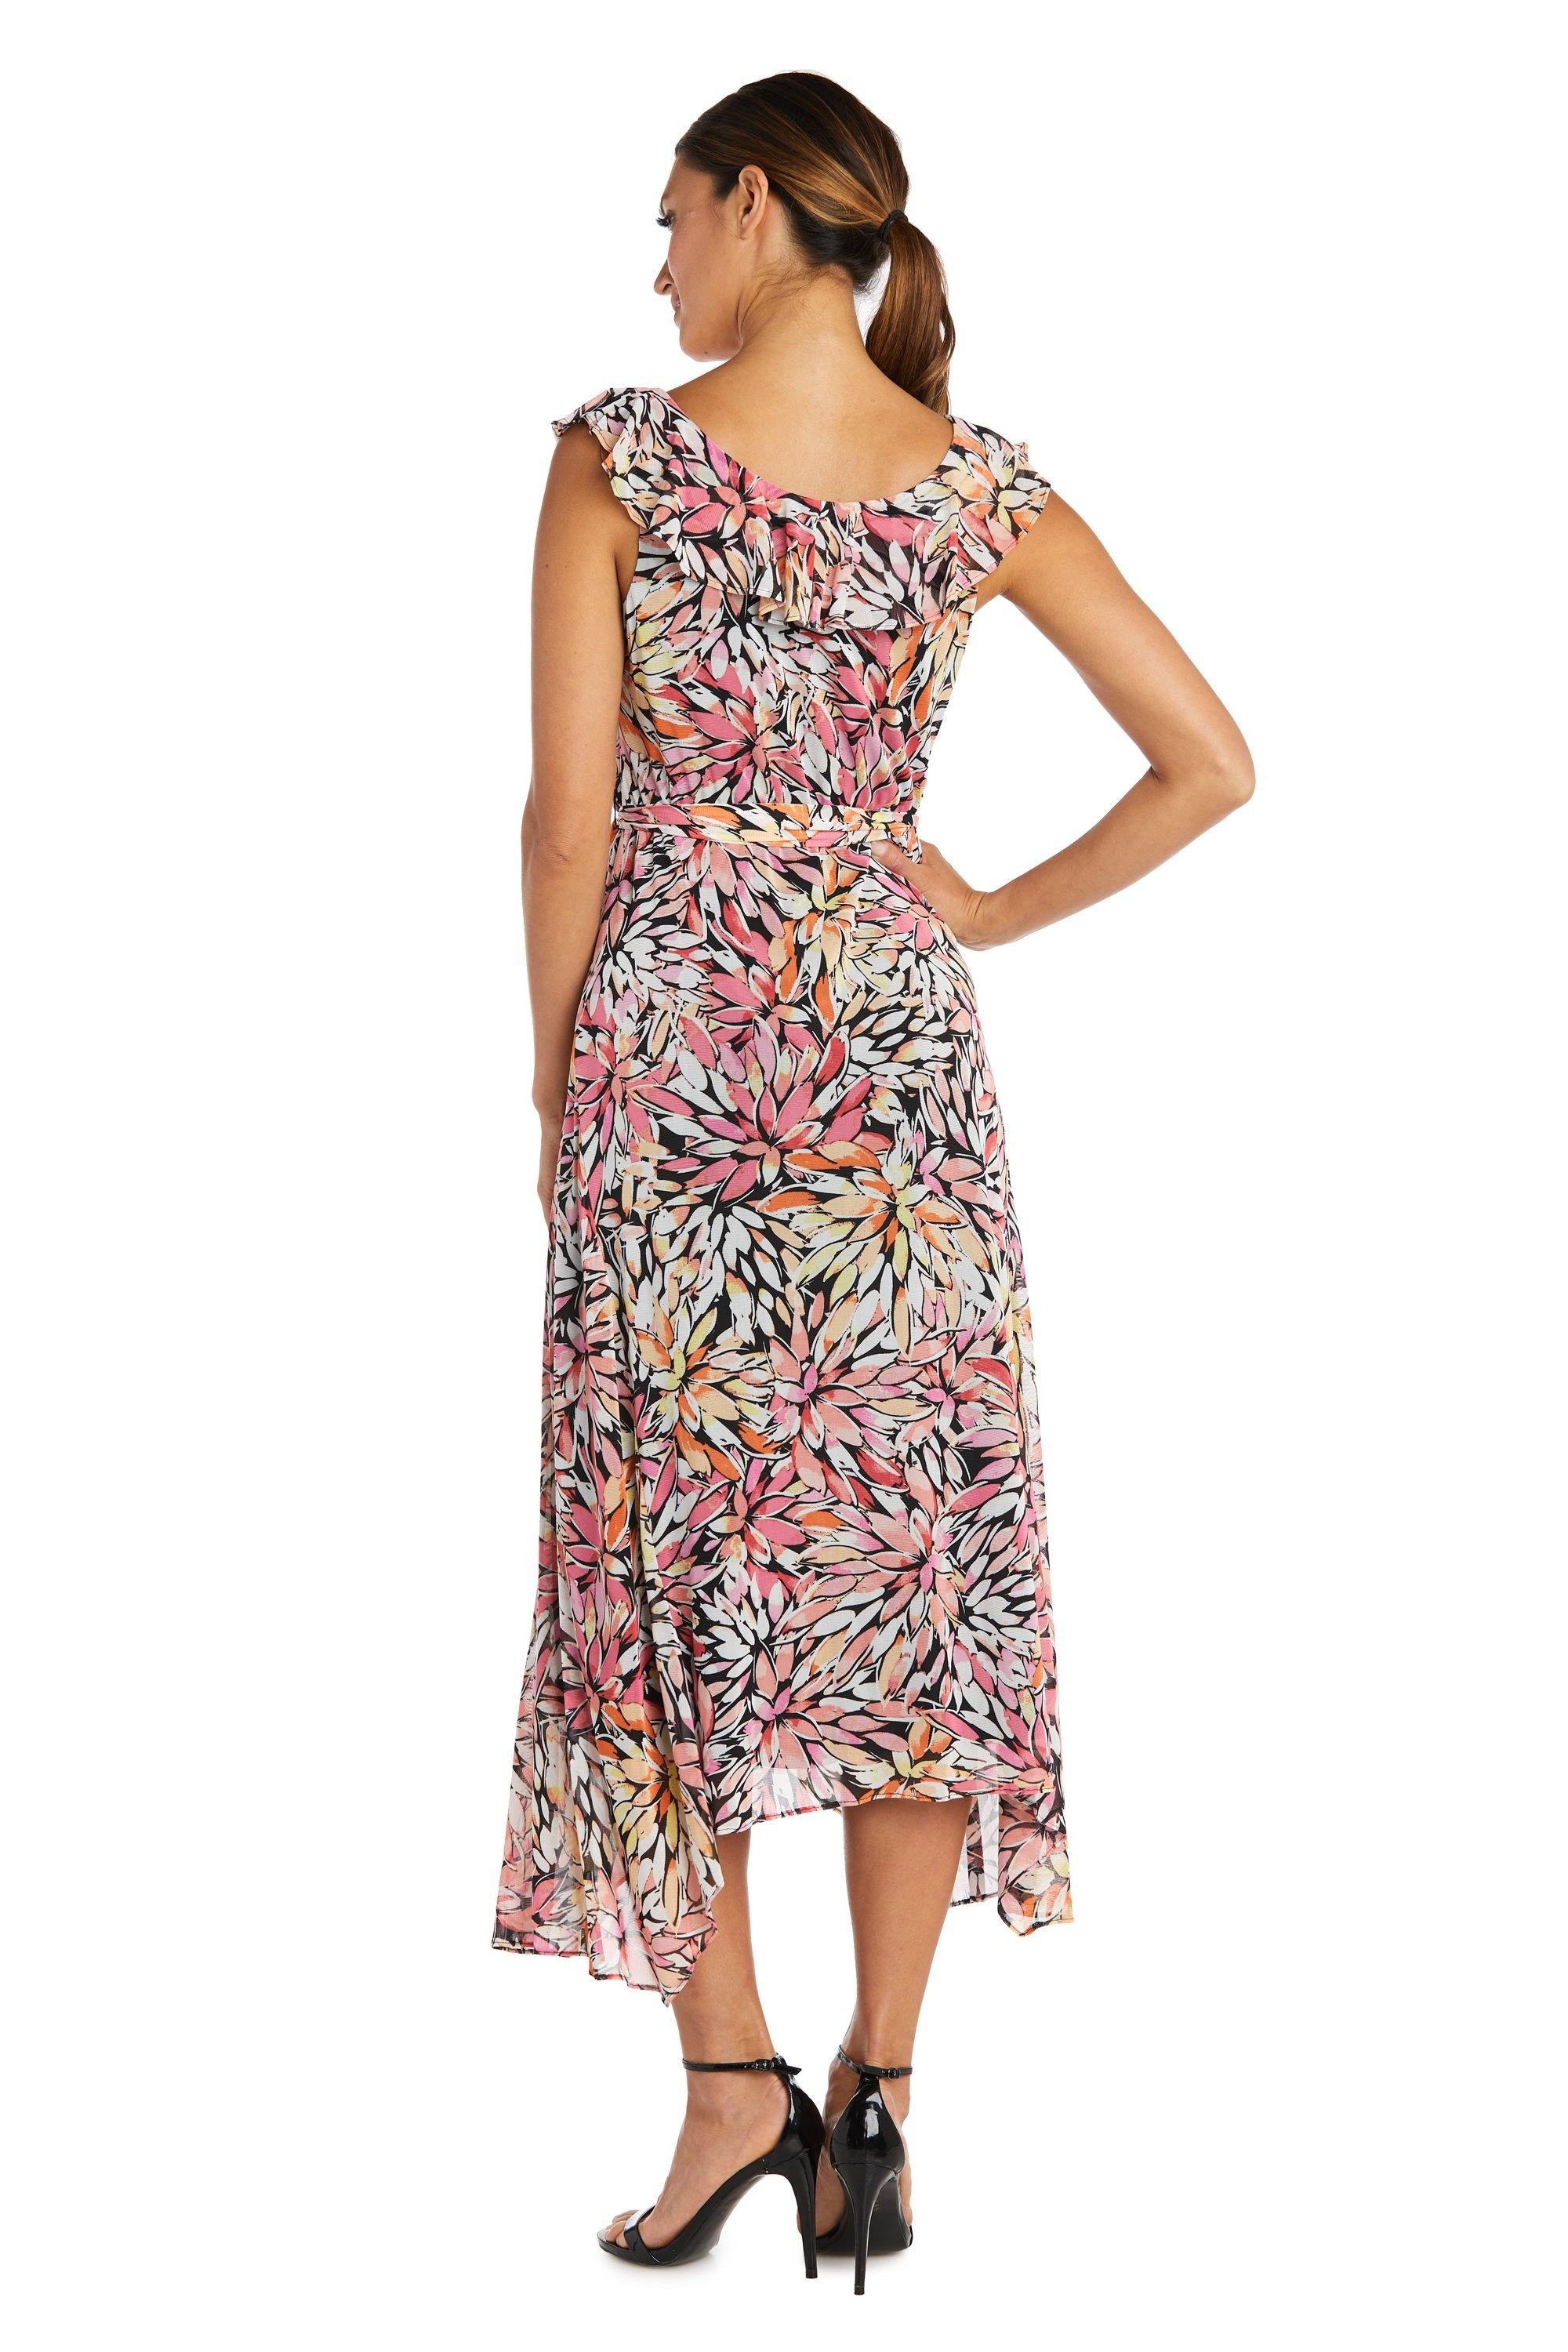 R&M Richards High Low Sleeveless Petite Dress 7204P - The Dress Outlet